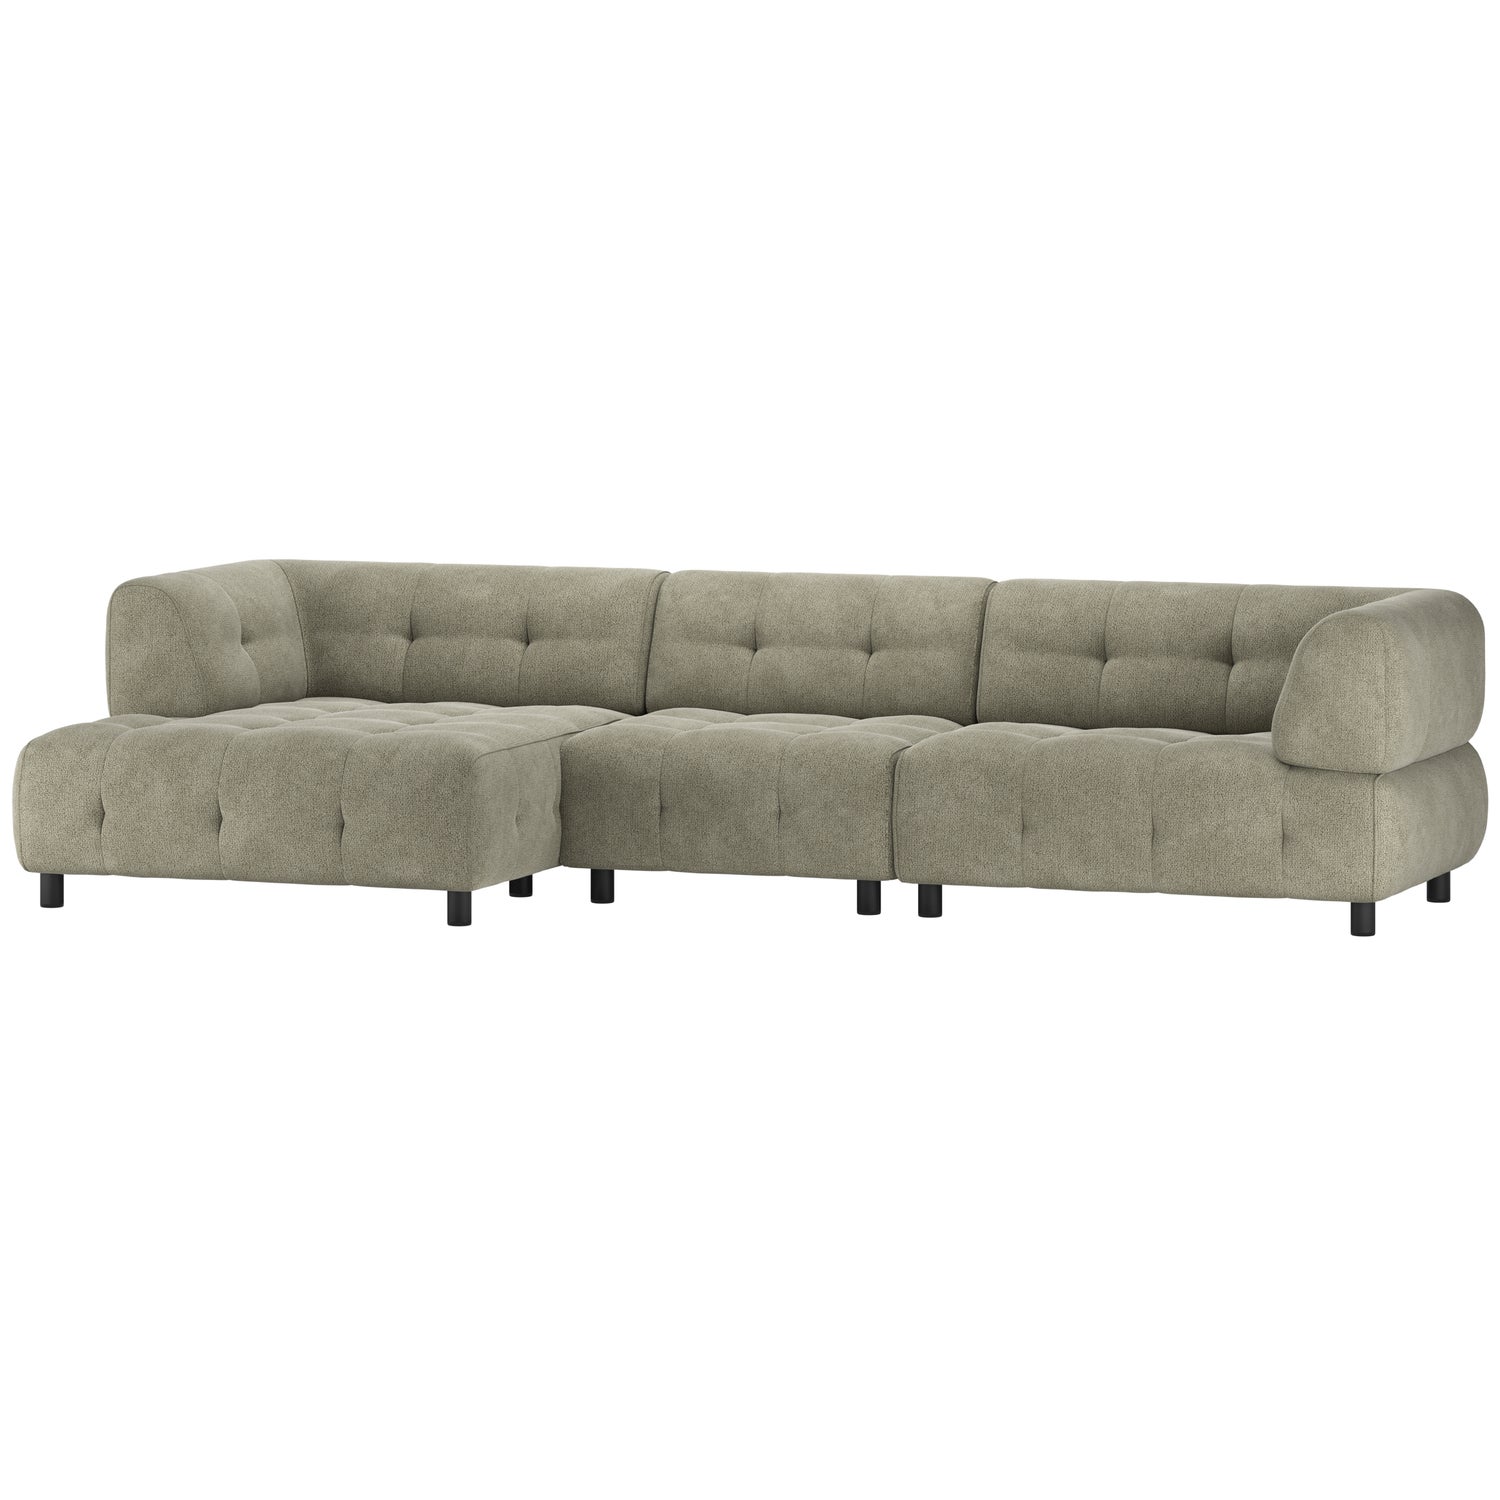 374132-CL-01_VS_WE_Louis_chaise_longue_links_chenille_leaf_SA.jpg?auto=webp&format=png&width=1500&height=1500